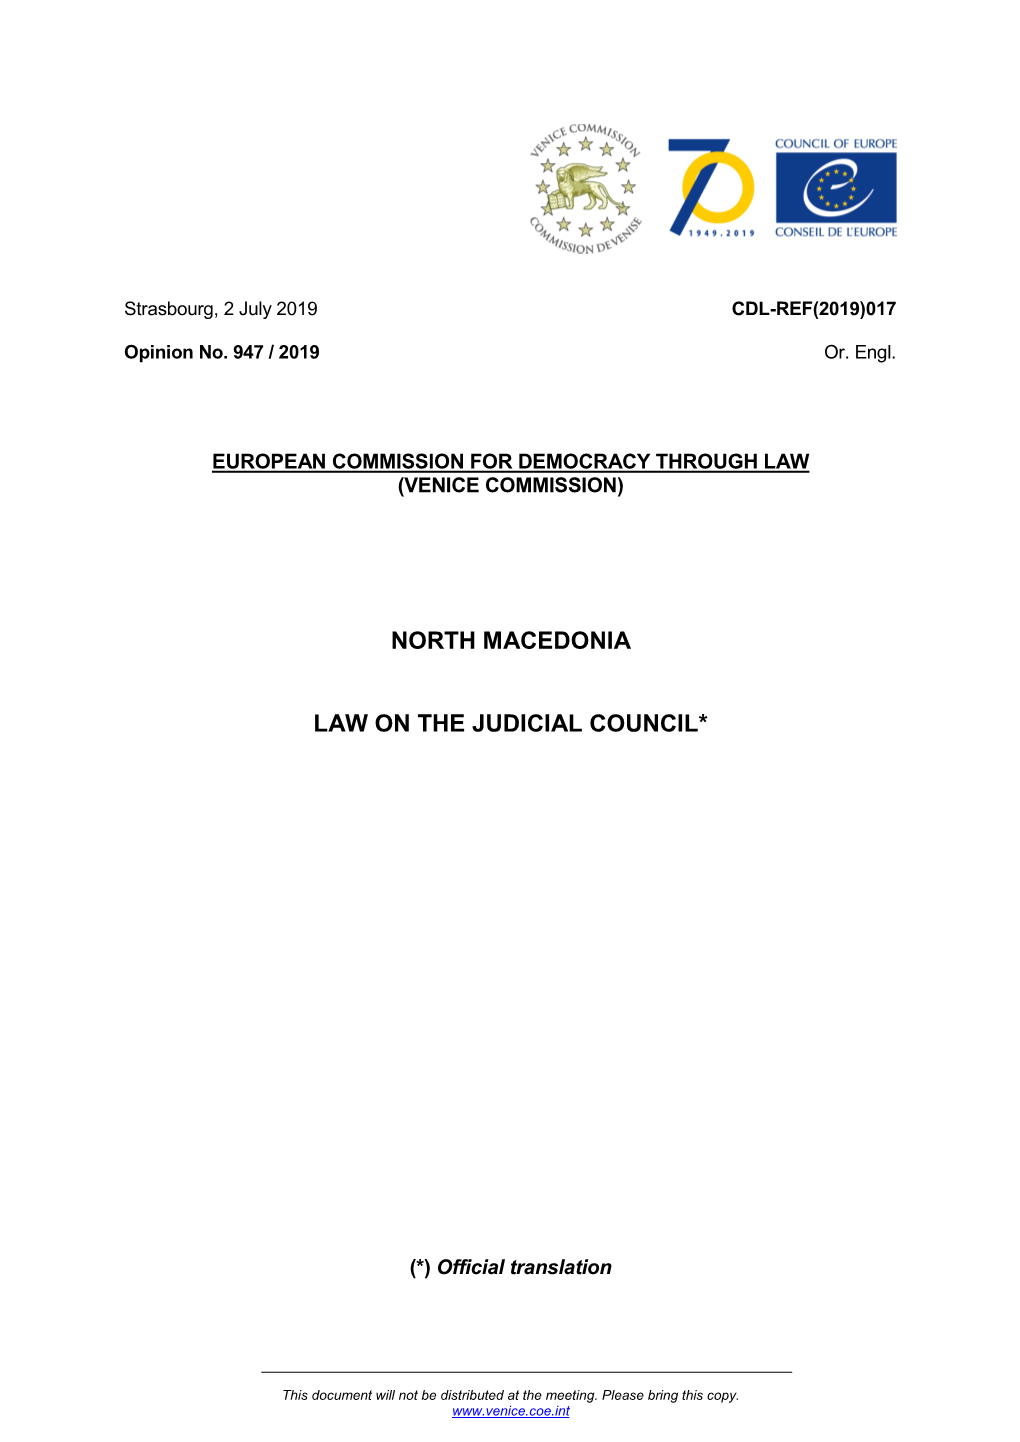 North Macedonia Law on the Judicial Council*